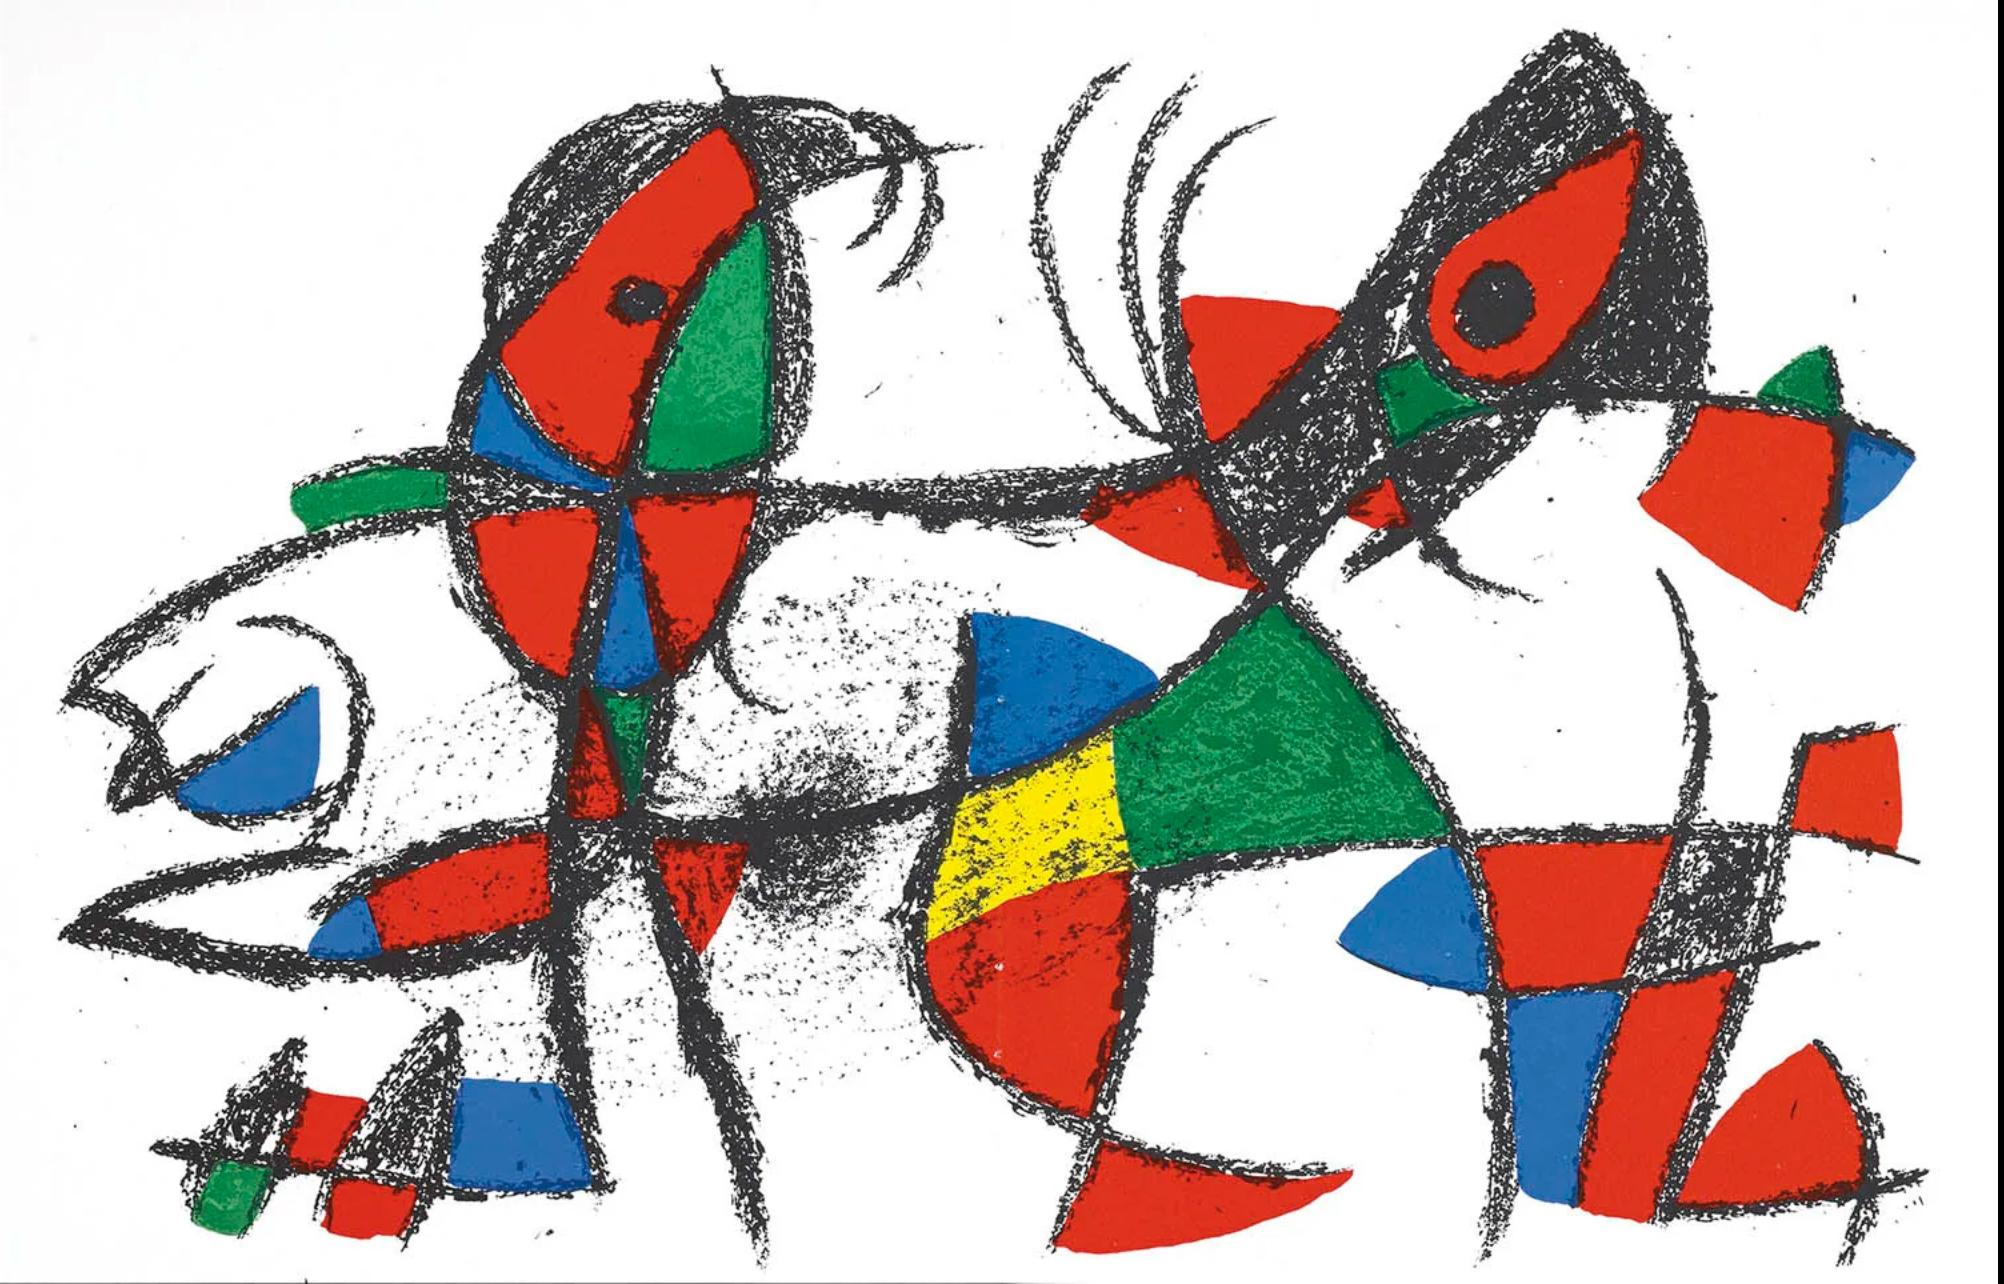 Joan Miró Abstract Print - Miro, Composition (Mourlot 1046), 1975 (after)